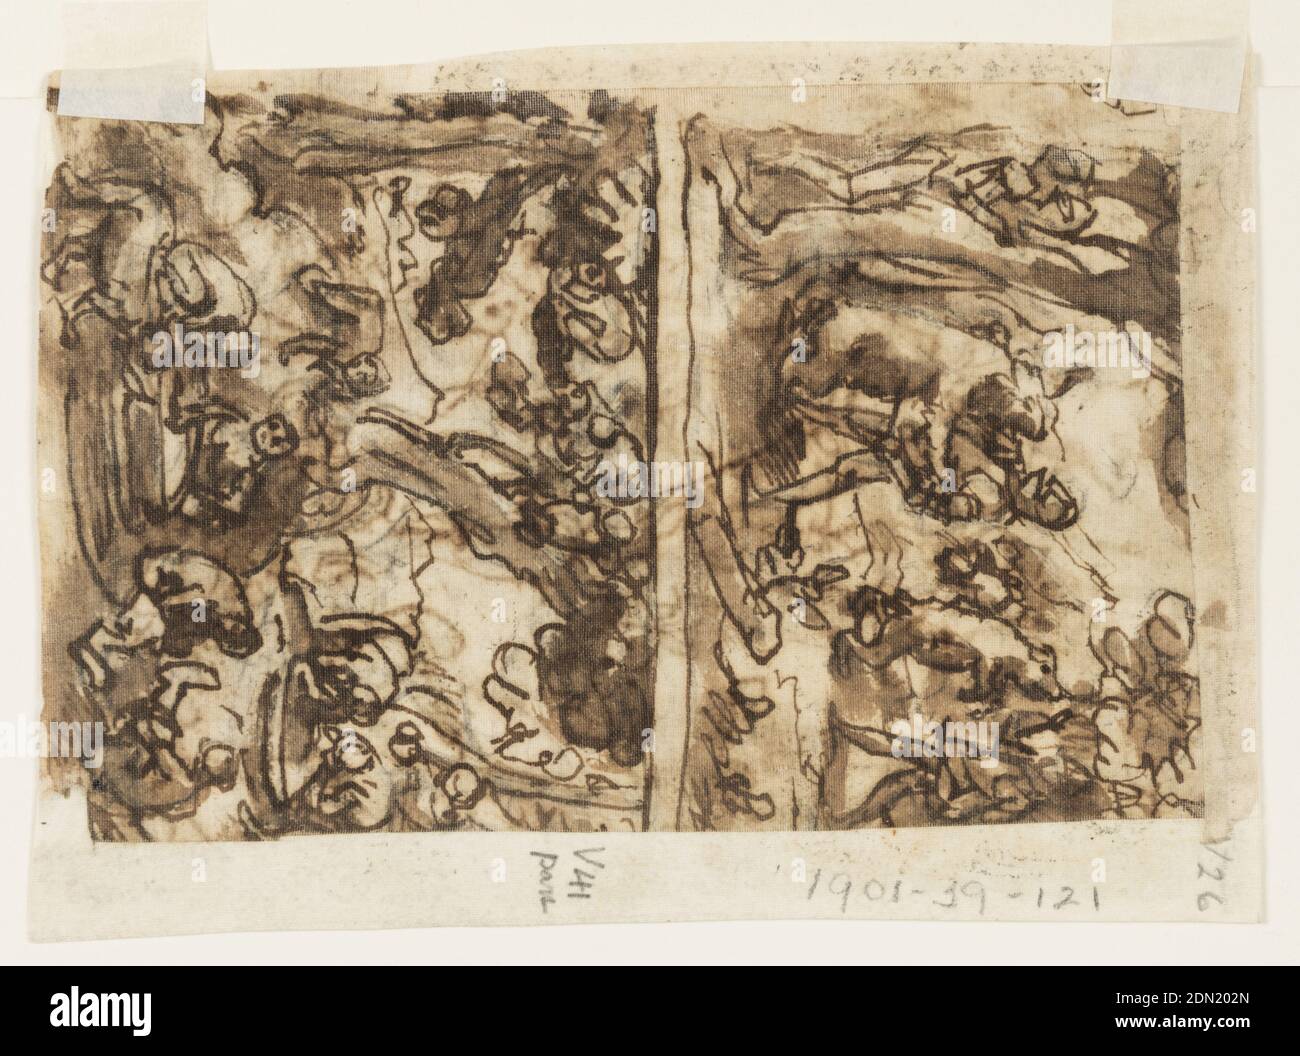 Recto: Bull hunt with Lassos; Verso, above: Bear hunt by Men in Armor; Verso, below: Hunting Monkeys by Deception; all preliminary designs for the Venationes series, Jan van der Straet, called Stradanus, Flemish, 1523–1605, Pen and brown ink, brush and brown wash on paper., Recto: Men on horseback lasso bulls with long poles and ropes. Reverse, upper right: men in armor attacked by bears. Bottom: monkeys washing themselves in basin. In the background, humans washing themselves in a similar way, Netherlands, 1596 or before, Drawing Stock Photo